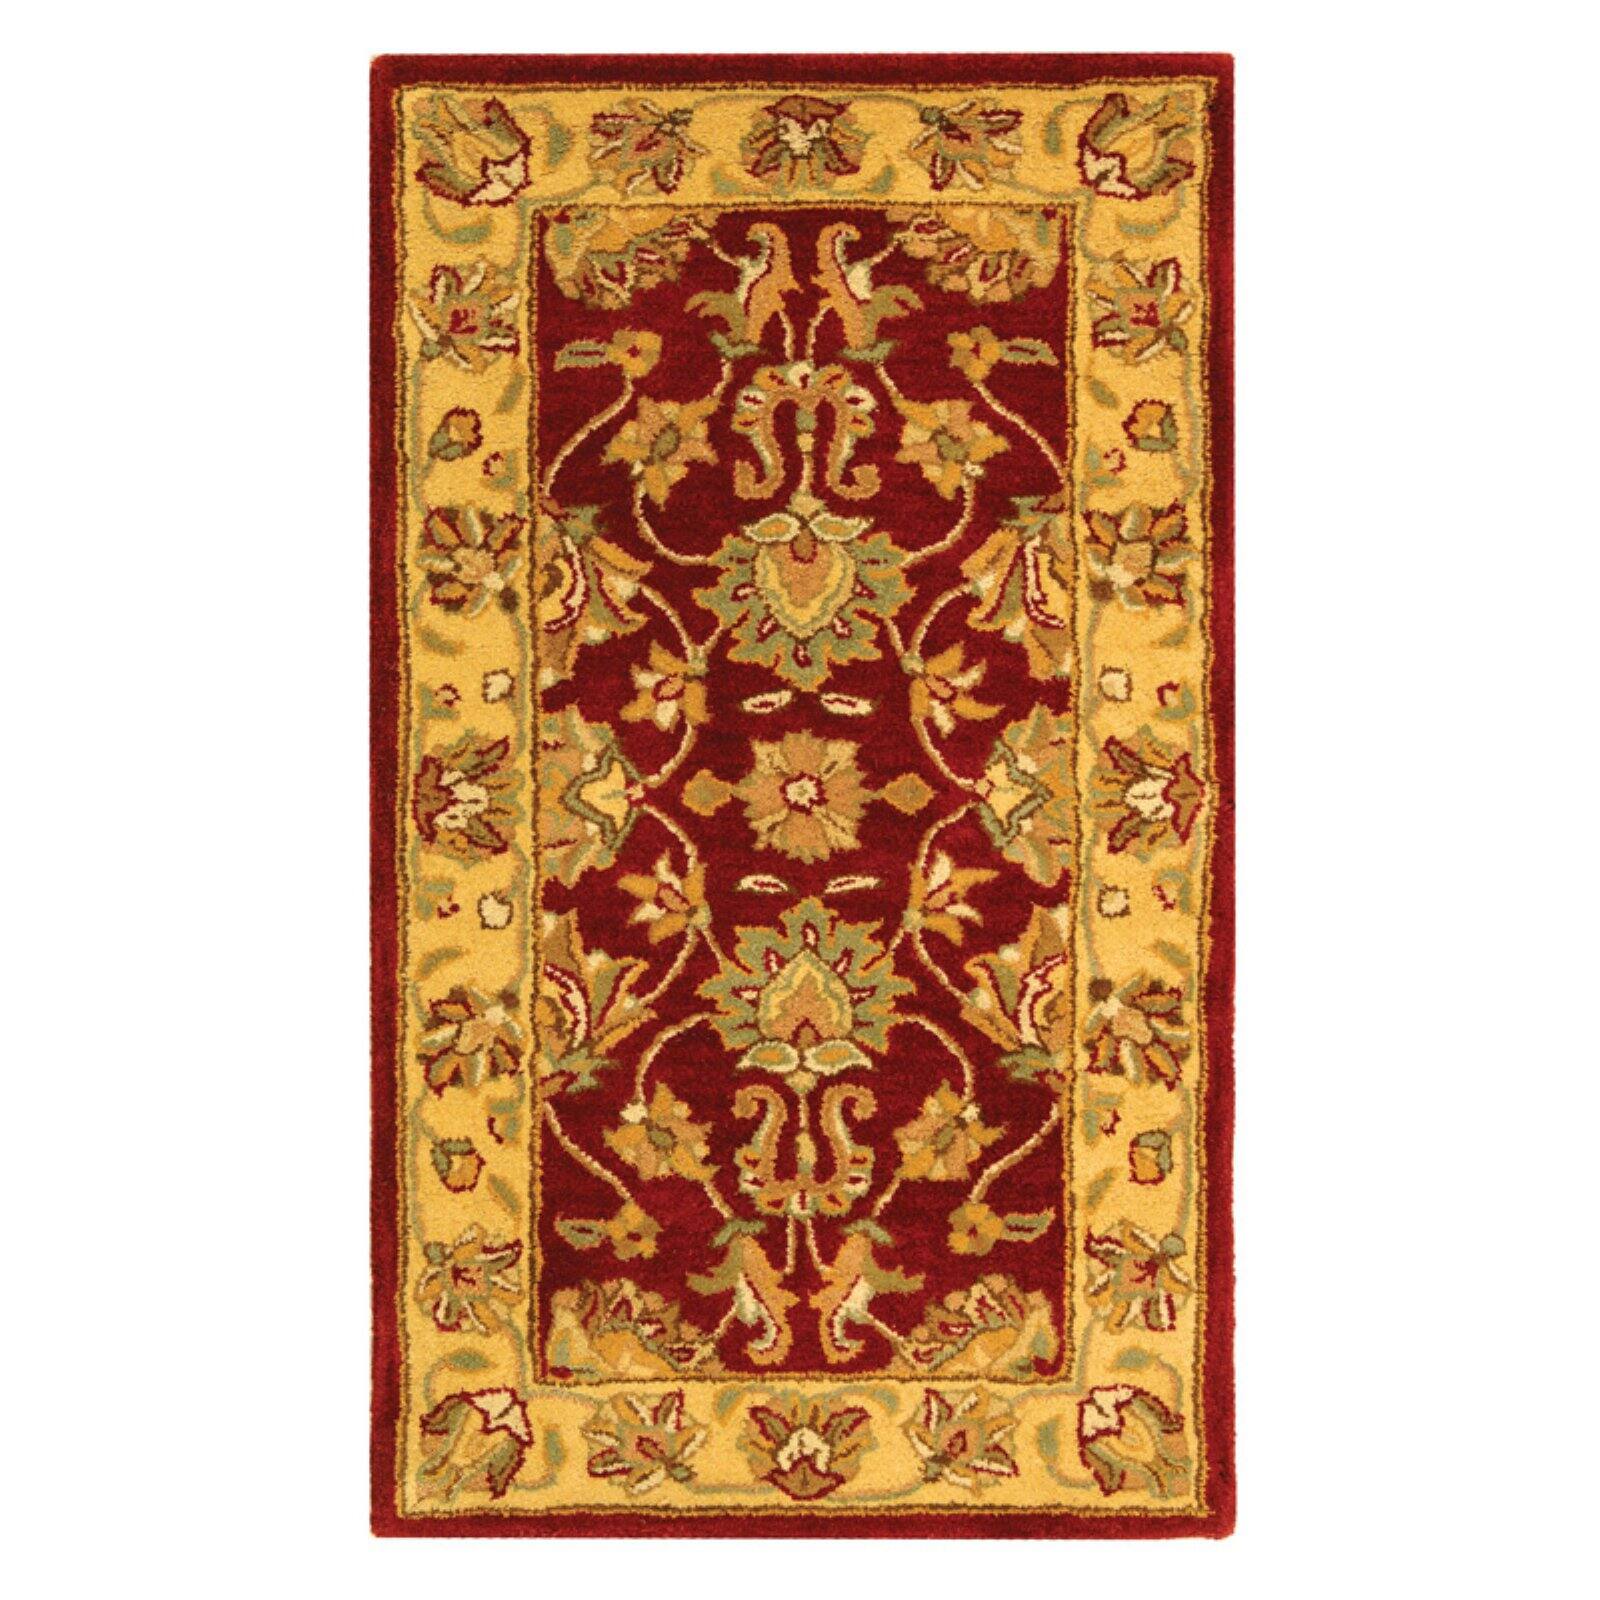 SAFAVIEH Heritage Regis Traditional Wool Area Rug, Red/Gold, 8'3" x 11' - image 2 of 9